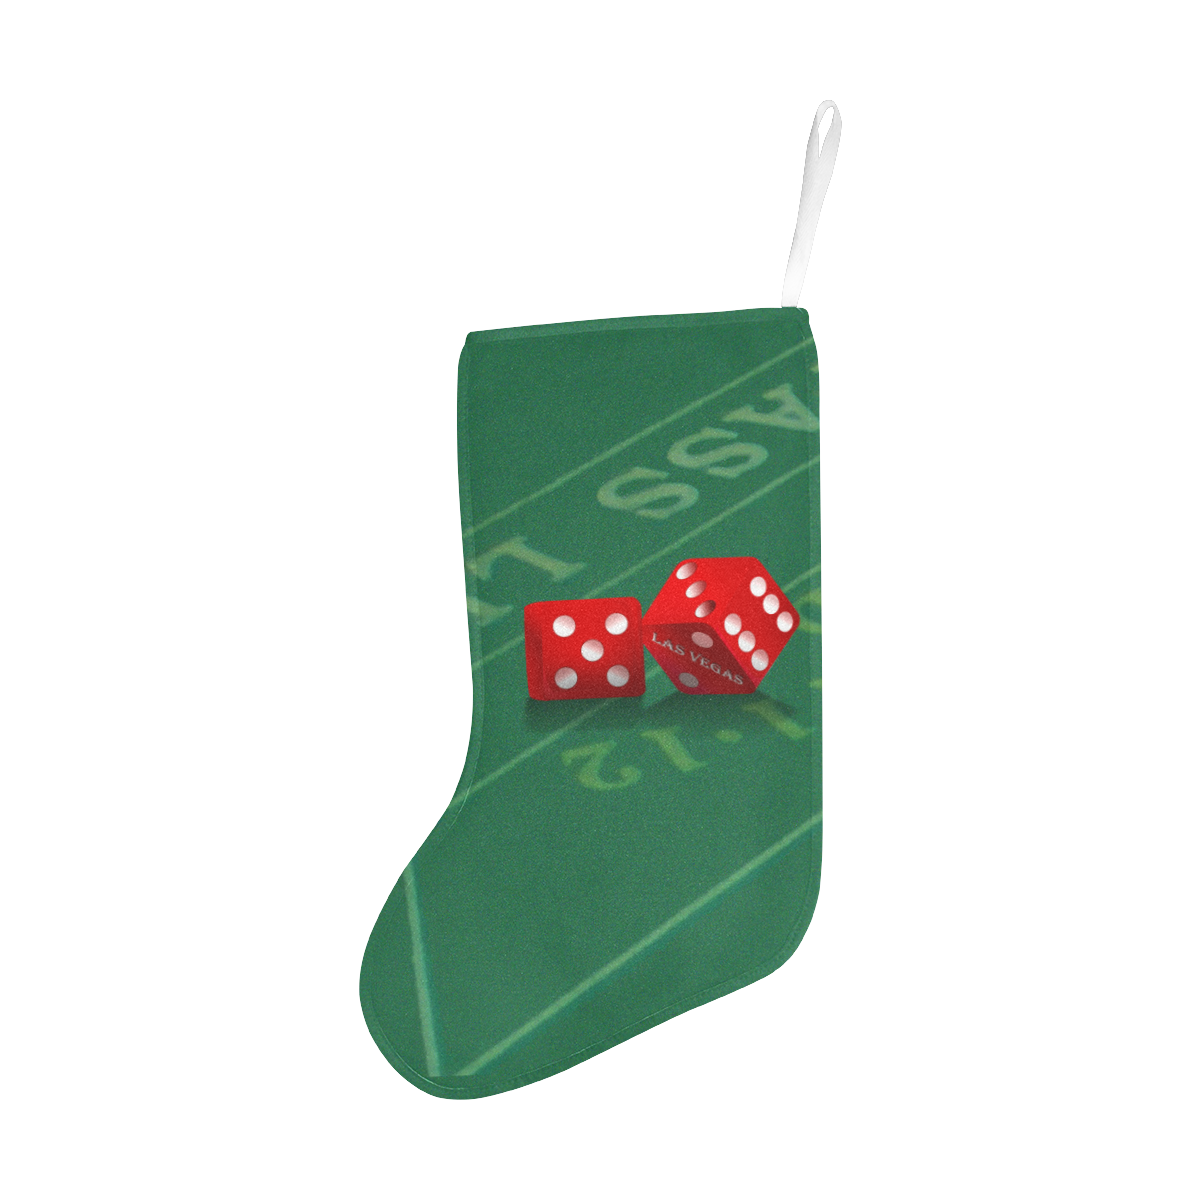 Las Vegas Dice on Craps Table Christmas Stocking (Without Folded Top)